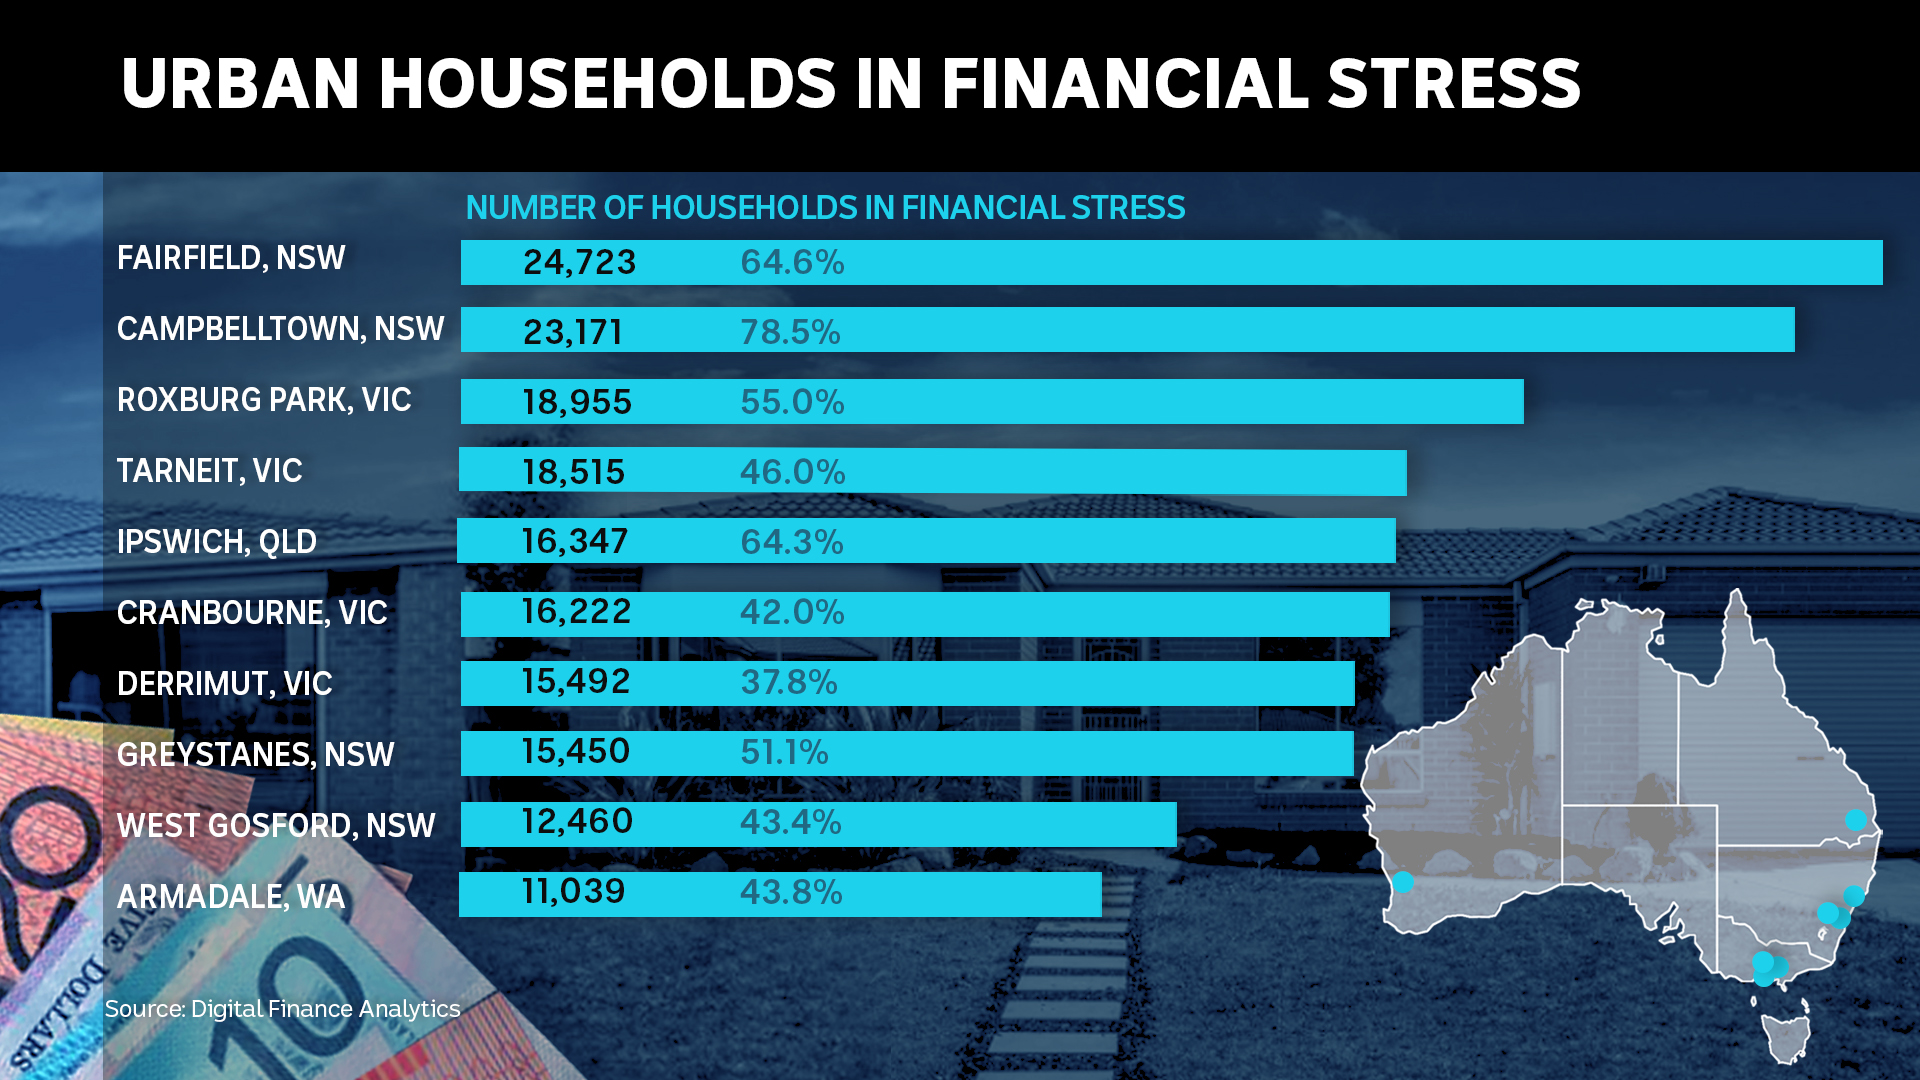 A graph showing 10 urban centres and the number of households facing financial stress published by Digital Finance Analytics.